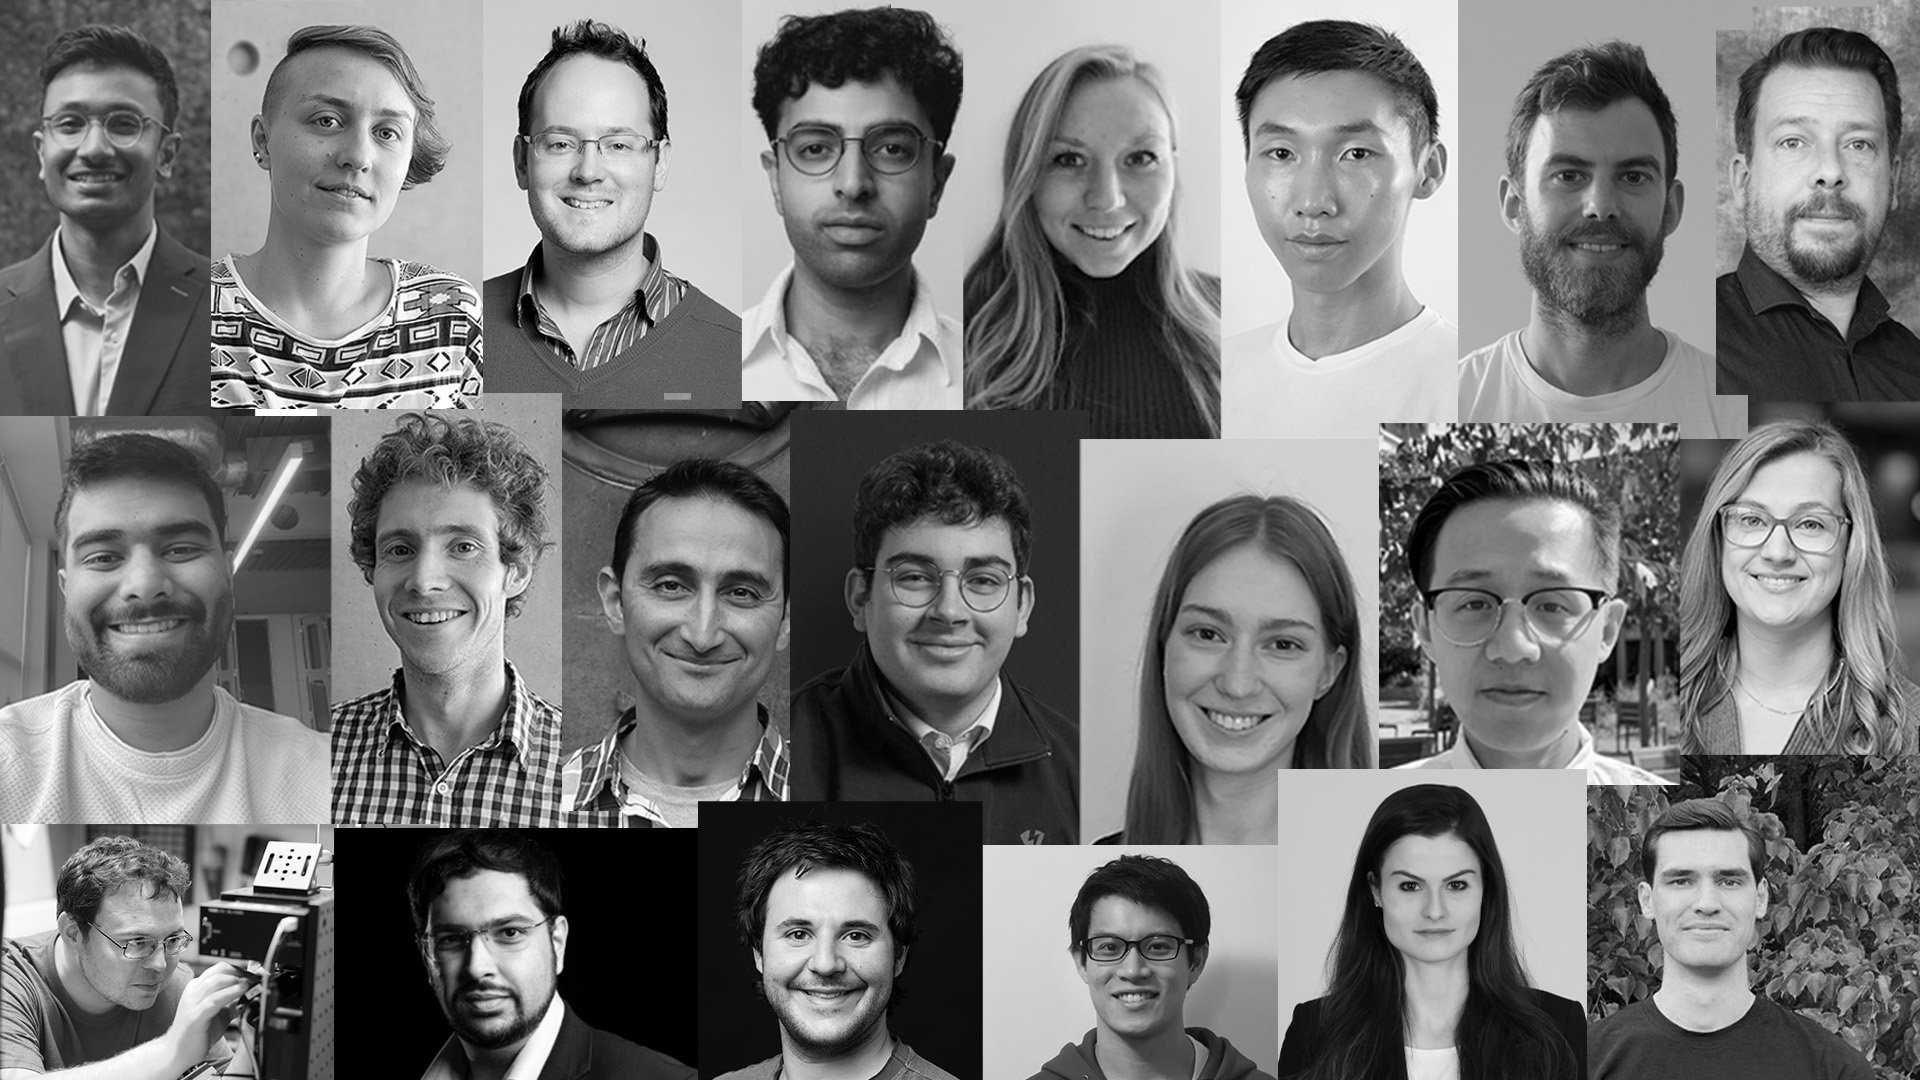 Meet the 11 start-ups selected for the first Founders at the University of Cambridge Start 1.0 accelerator